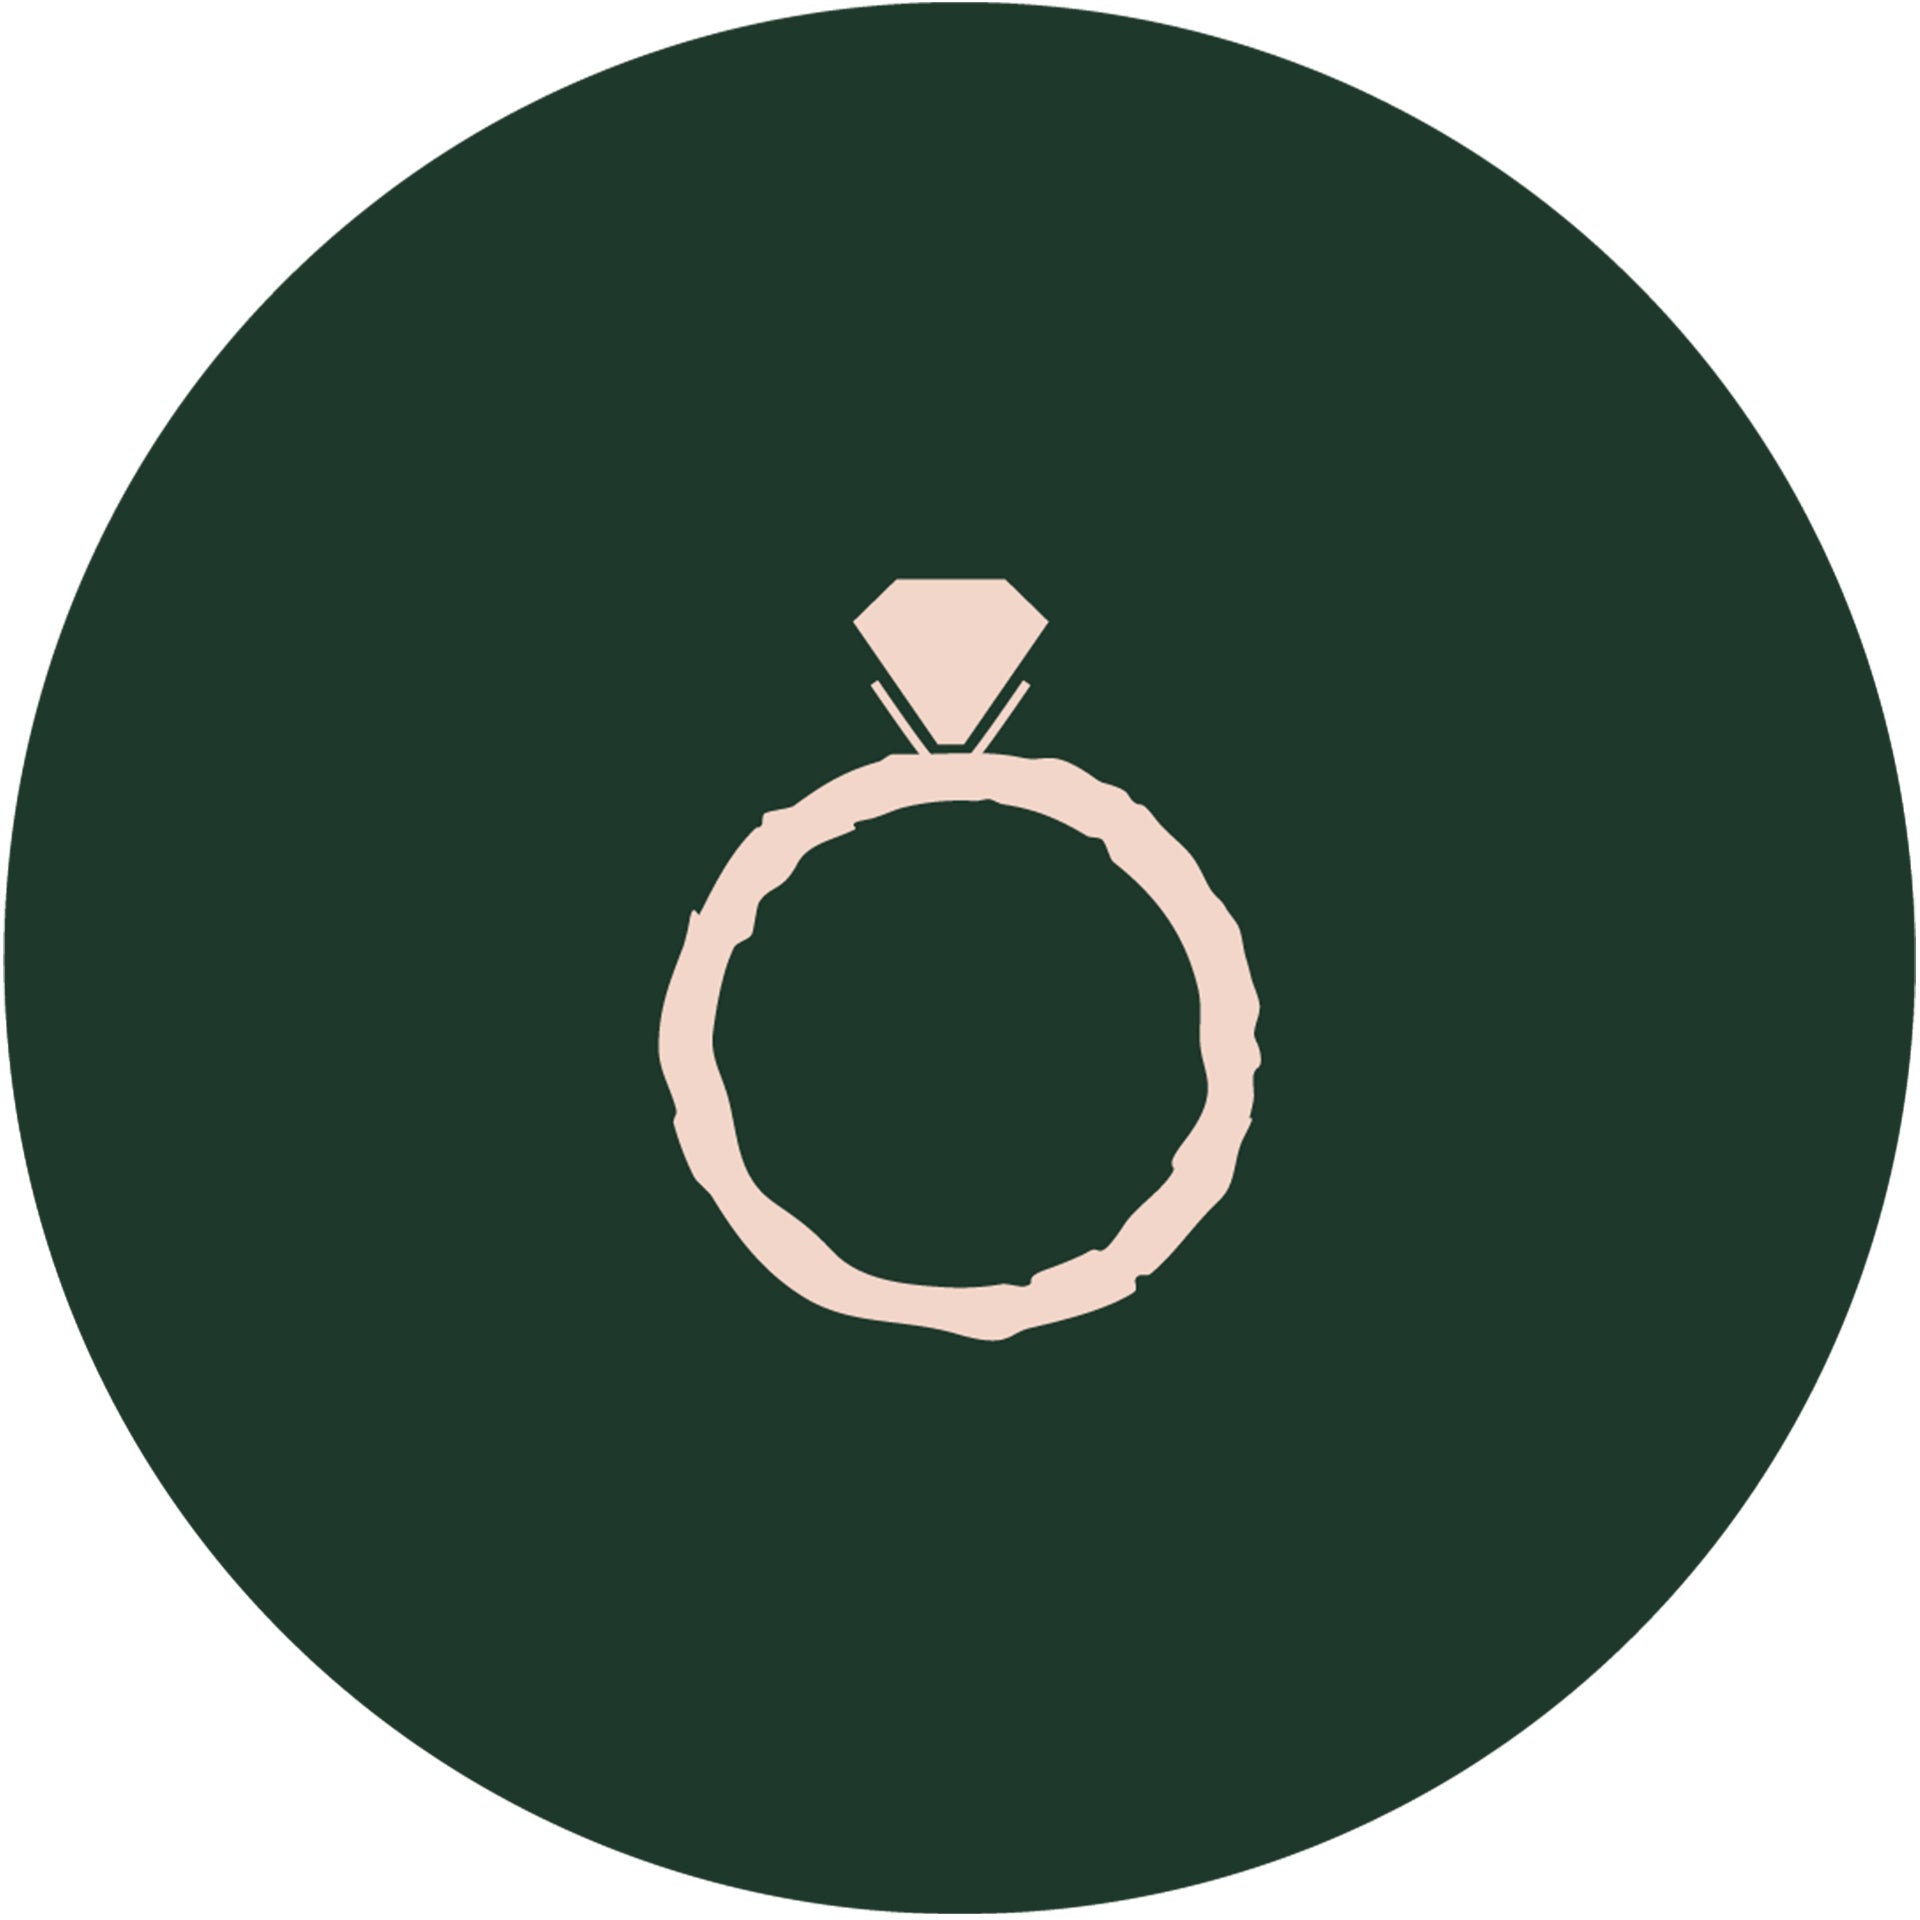 Feature Ring With Stone - Create